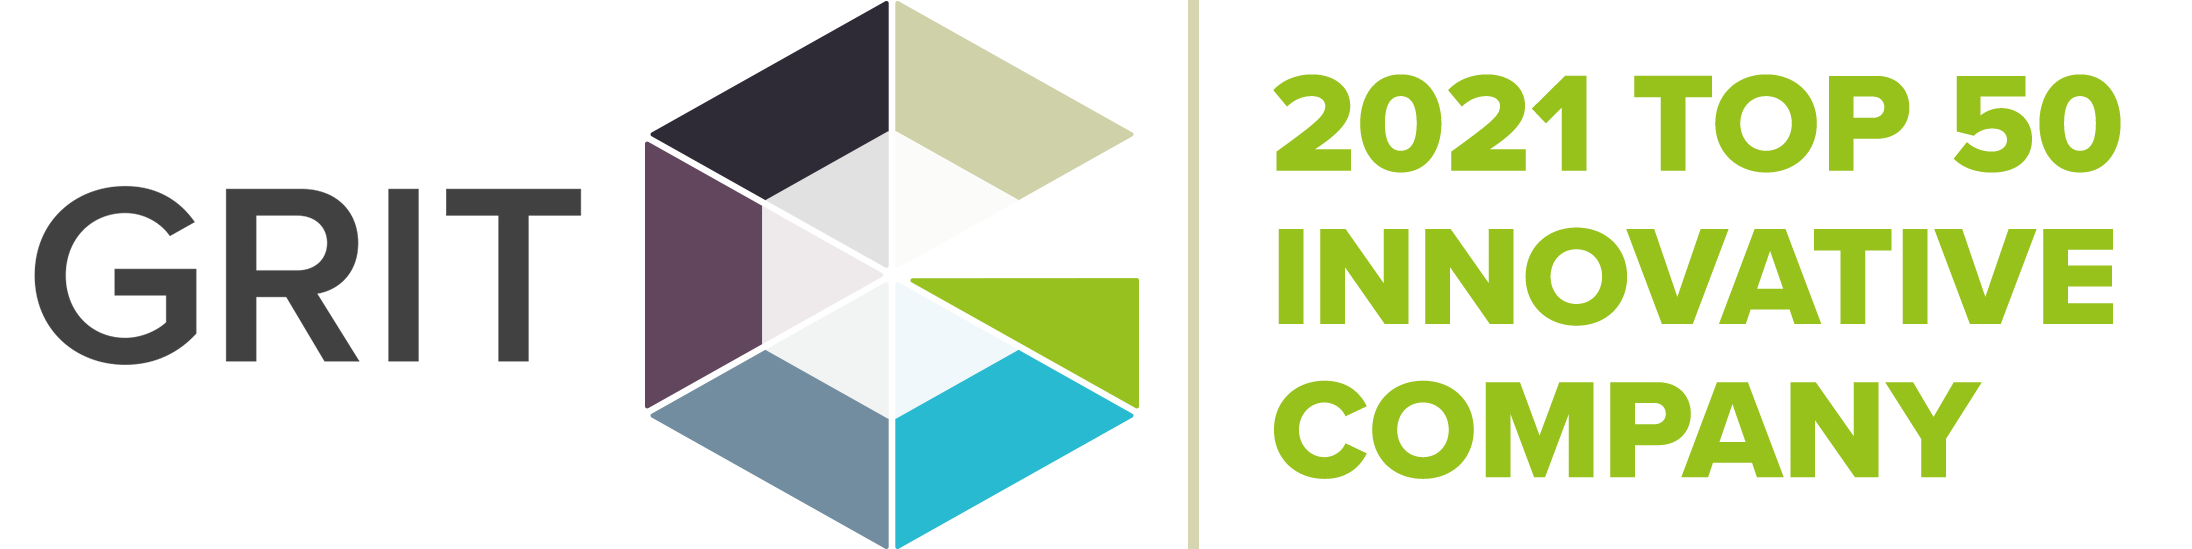 Delvinia was awarded the 2021 Top 50 Innovative Company by GRIT